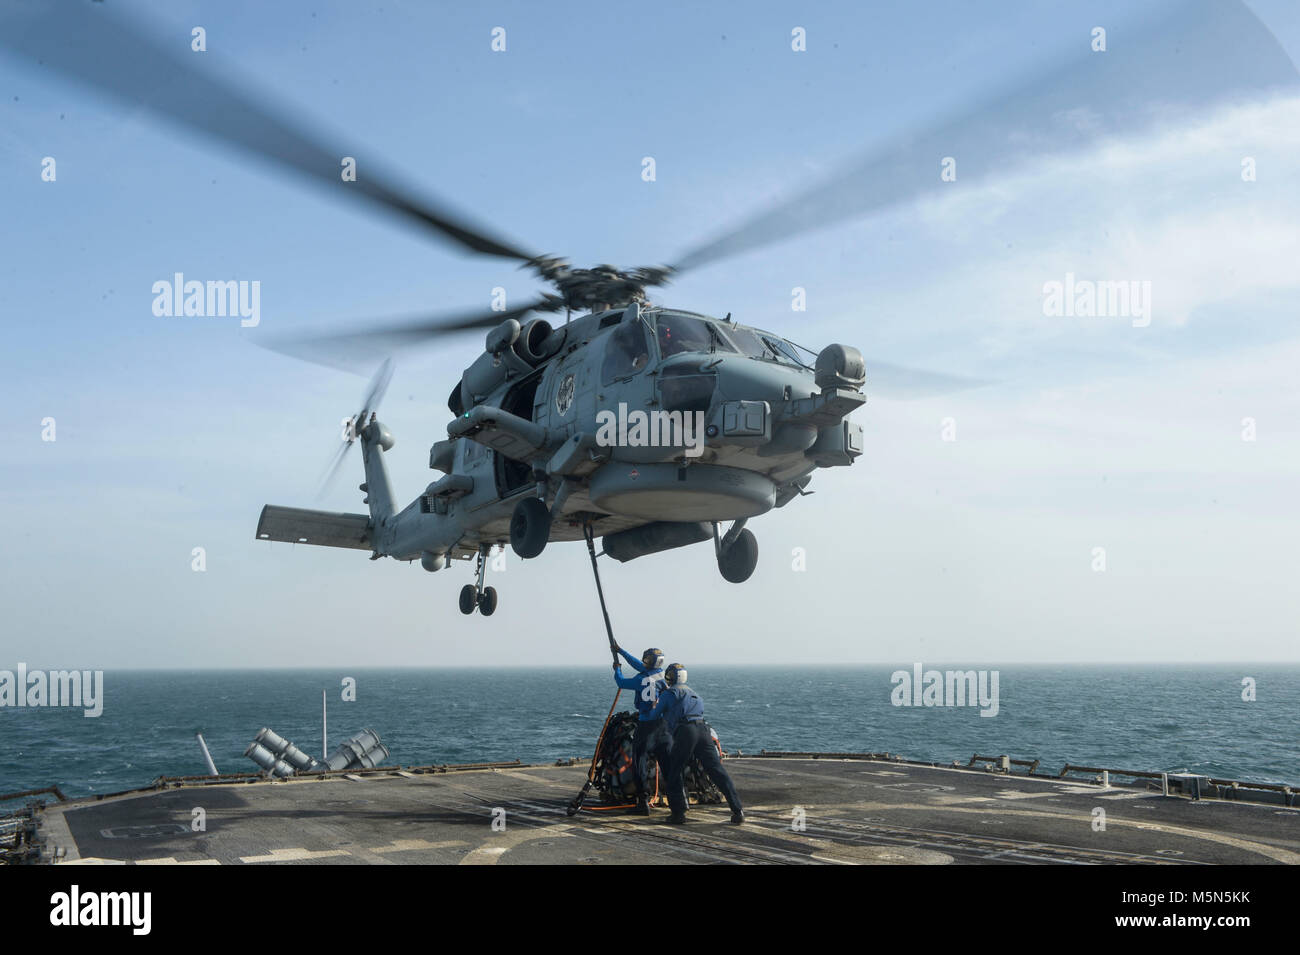 180220-N-VT388-2032 ARABIAN GULF (Feb. 20, 2018) Sailors lift a cargo hook toward an MH-60R Sea Hawk helicopter assigned to the Battlecats of Helicopter Maritime Strike Squadron (HSM) 73, to practice vertical replenishment techniques aboard the guided-missile cruiser USS Bunker Hill (CG 52). Bunker Hill is deployed with the Theodore Roosevelt Carrier Strike Group to the U.S. 5th Fleet area of operations in support of maritime security operations to reassure allies and partners and preserve the freedom of navigation and the free flow of commerce in the region. (U.S. Navy photo by Mass Communica Stock Photo